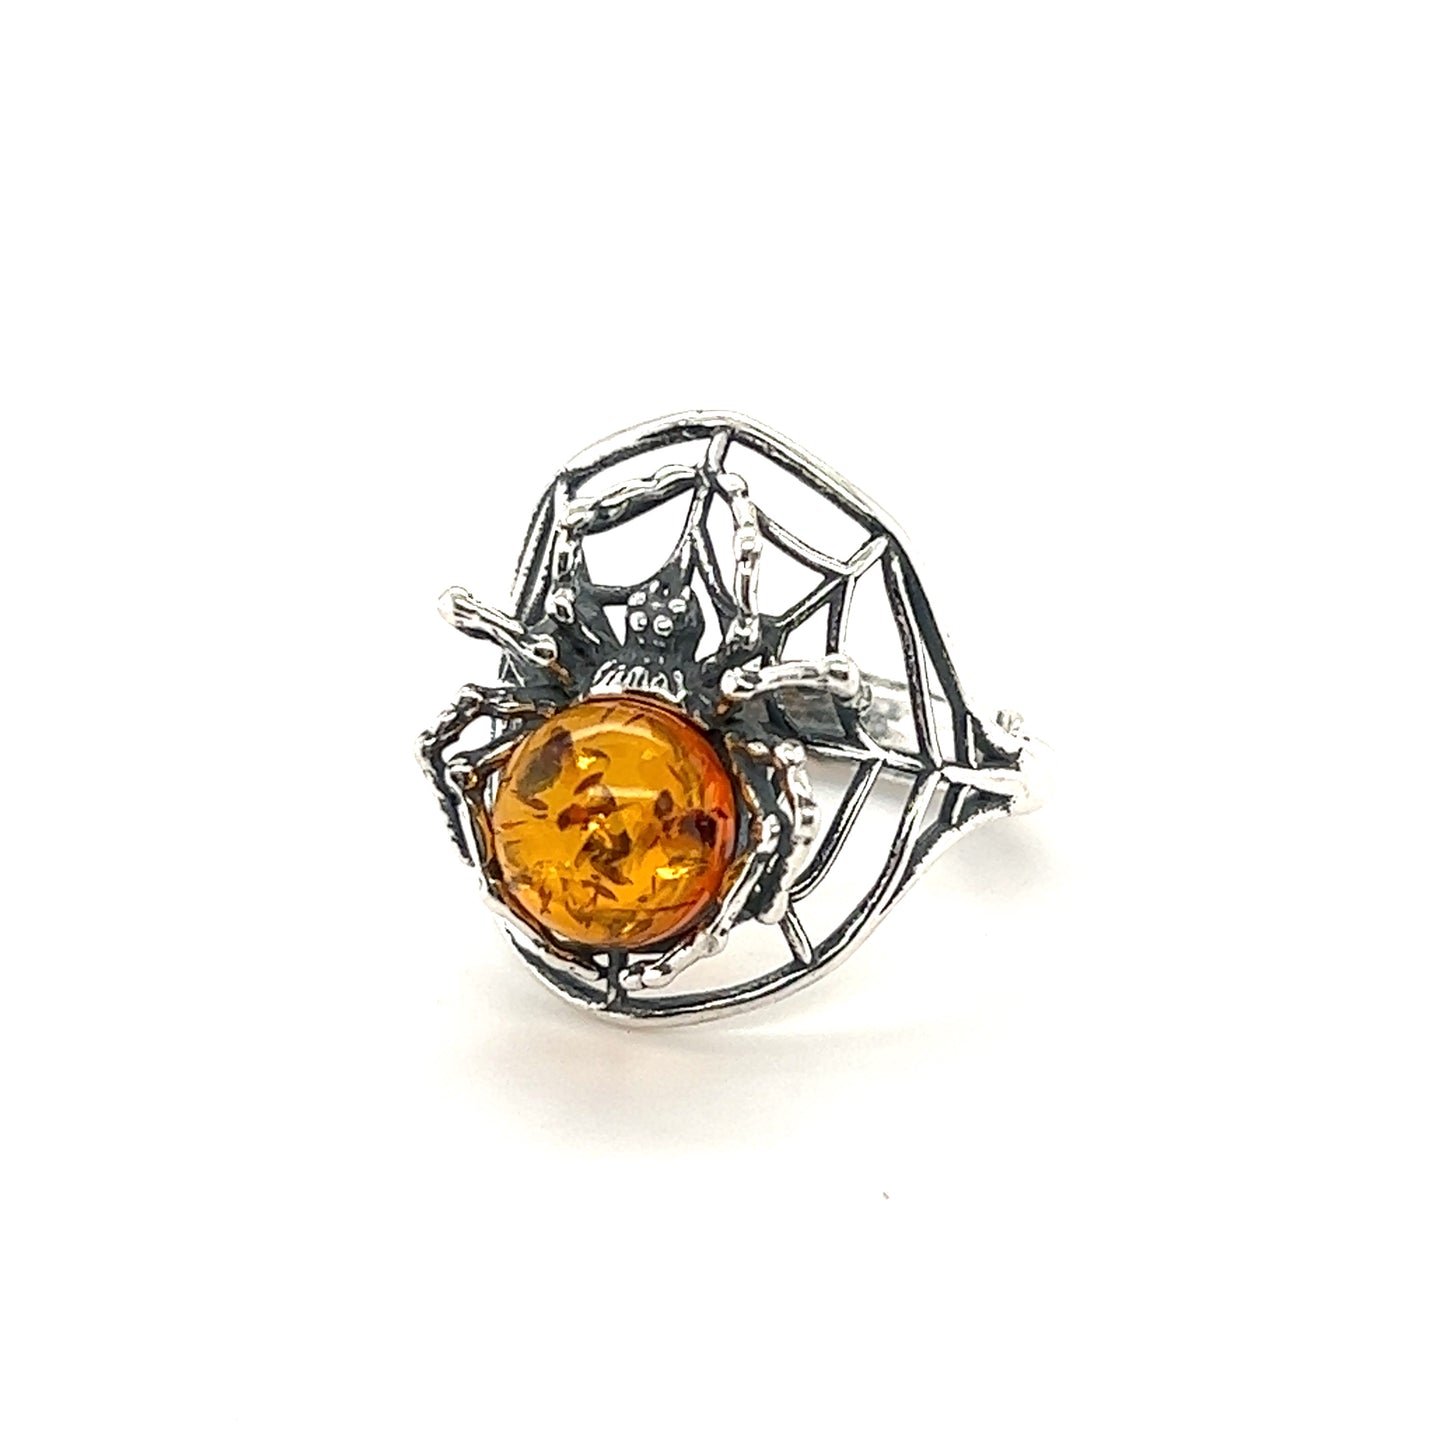 This Entrancing Baltic Amber Spider Ring from Super Silver features a stunning Baltic amber stone that exudes centering energy.